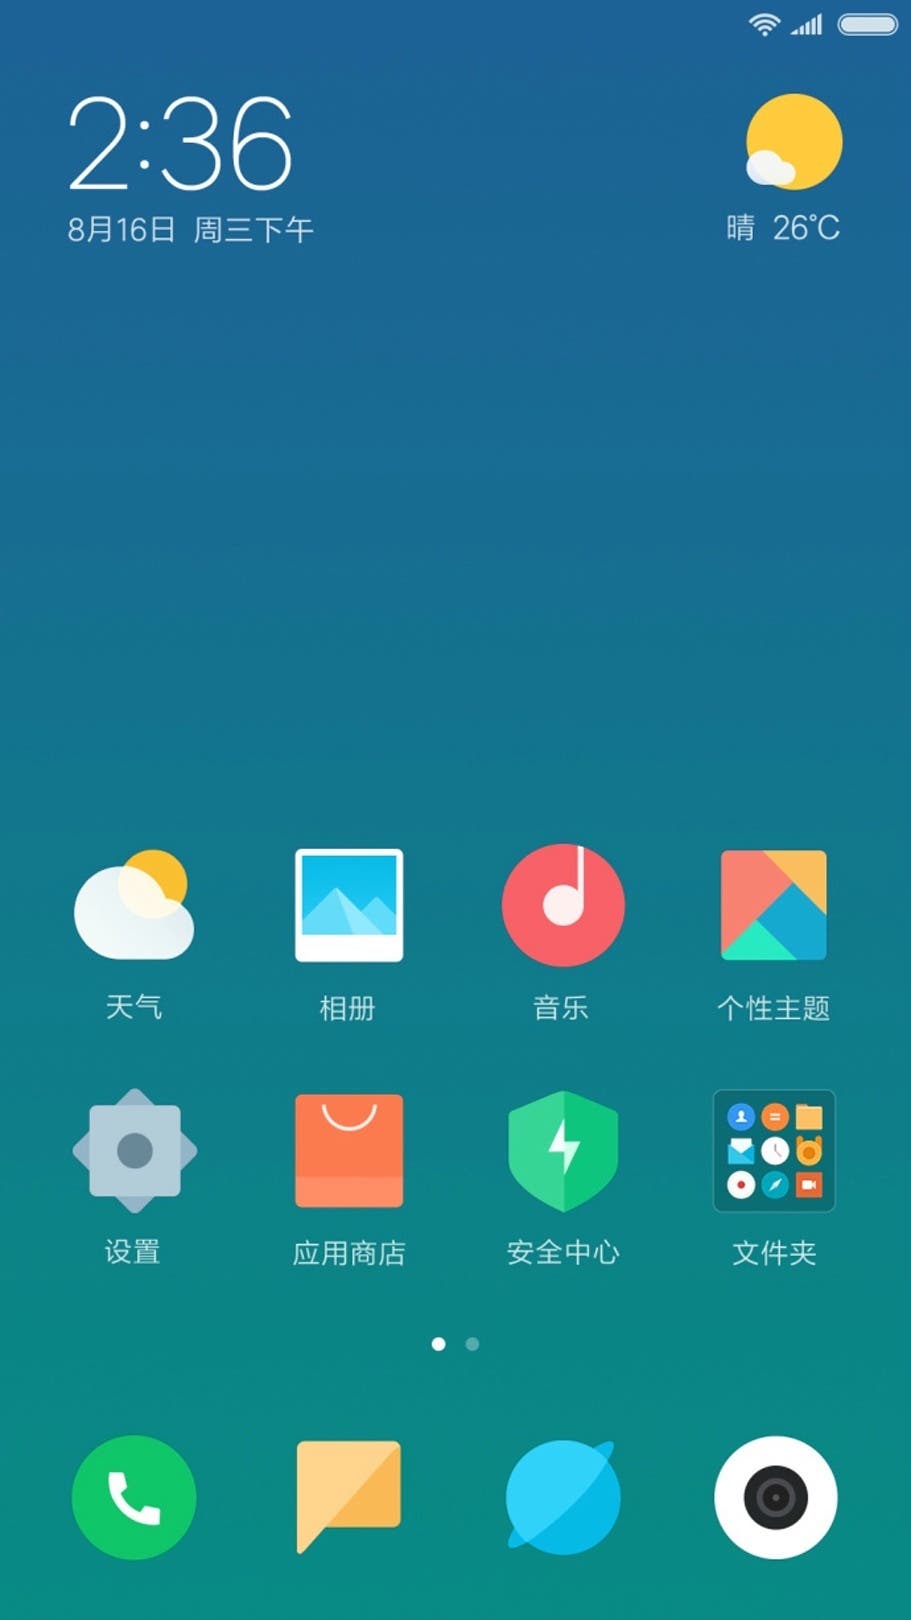 show tags tumblr themes that leak, Official screenshots dock MIUI reveal redesigned 9